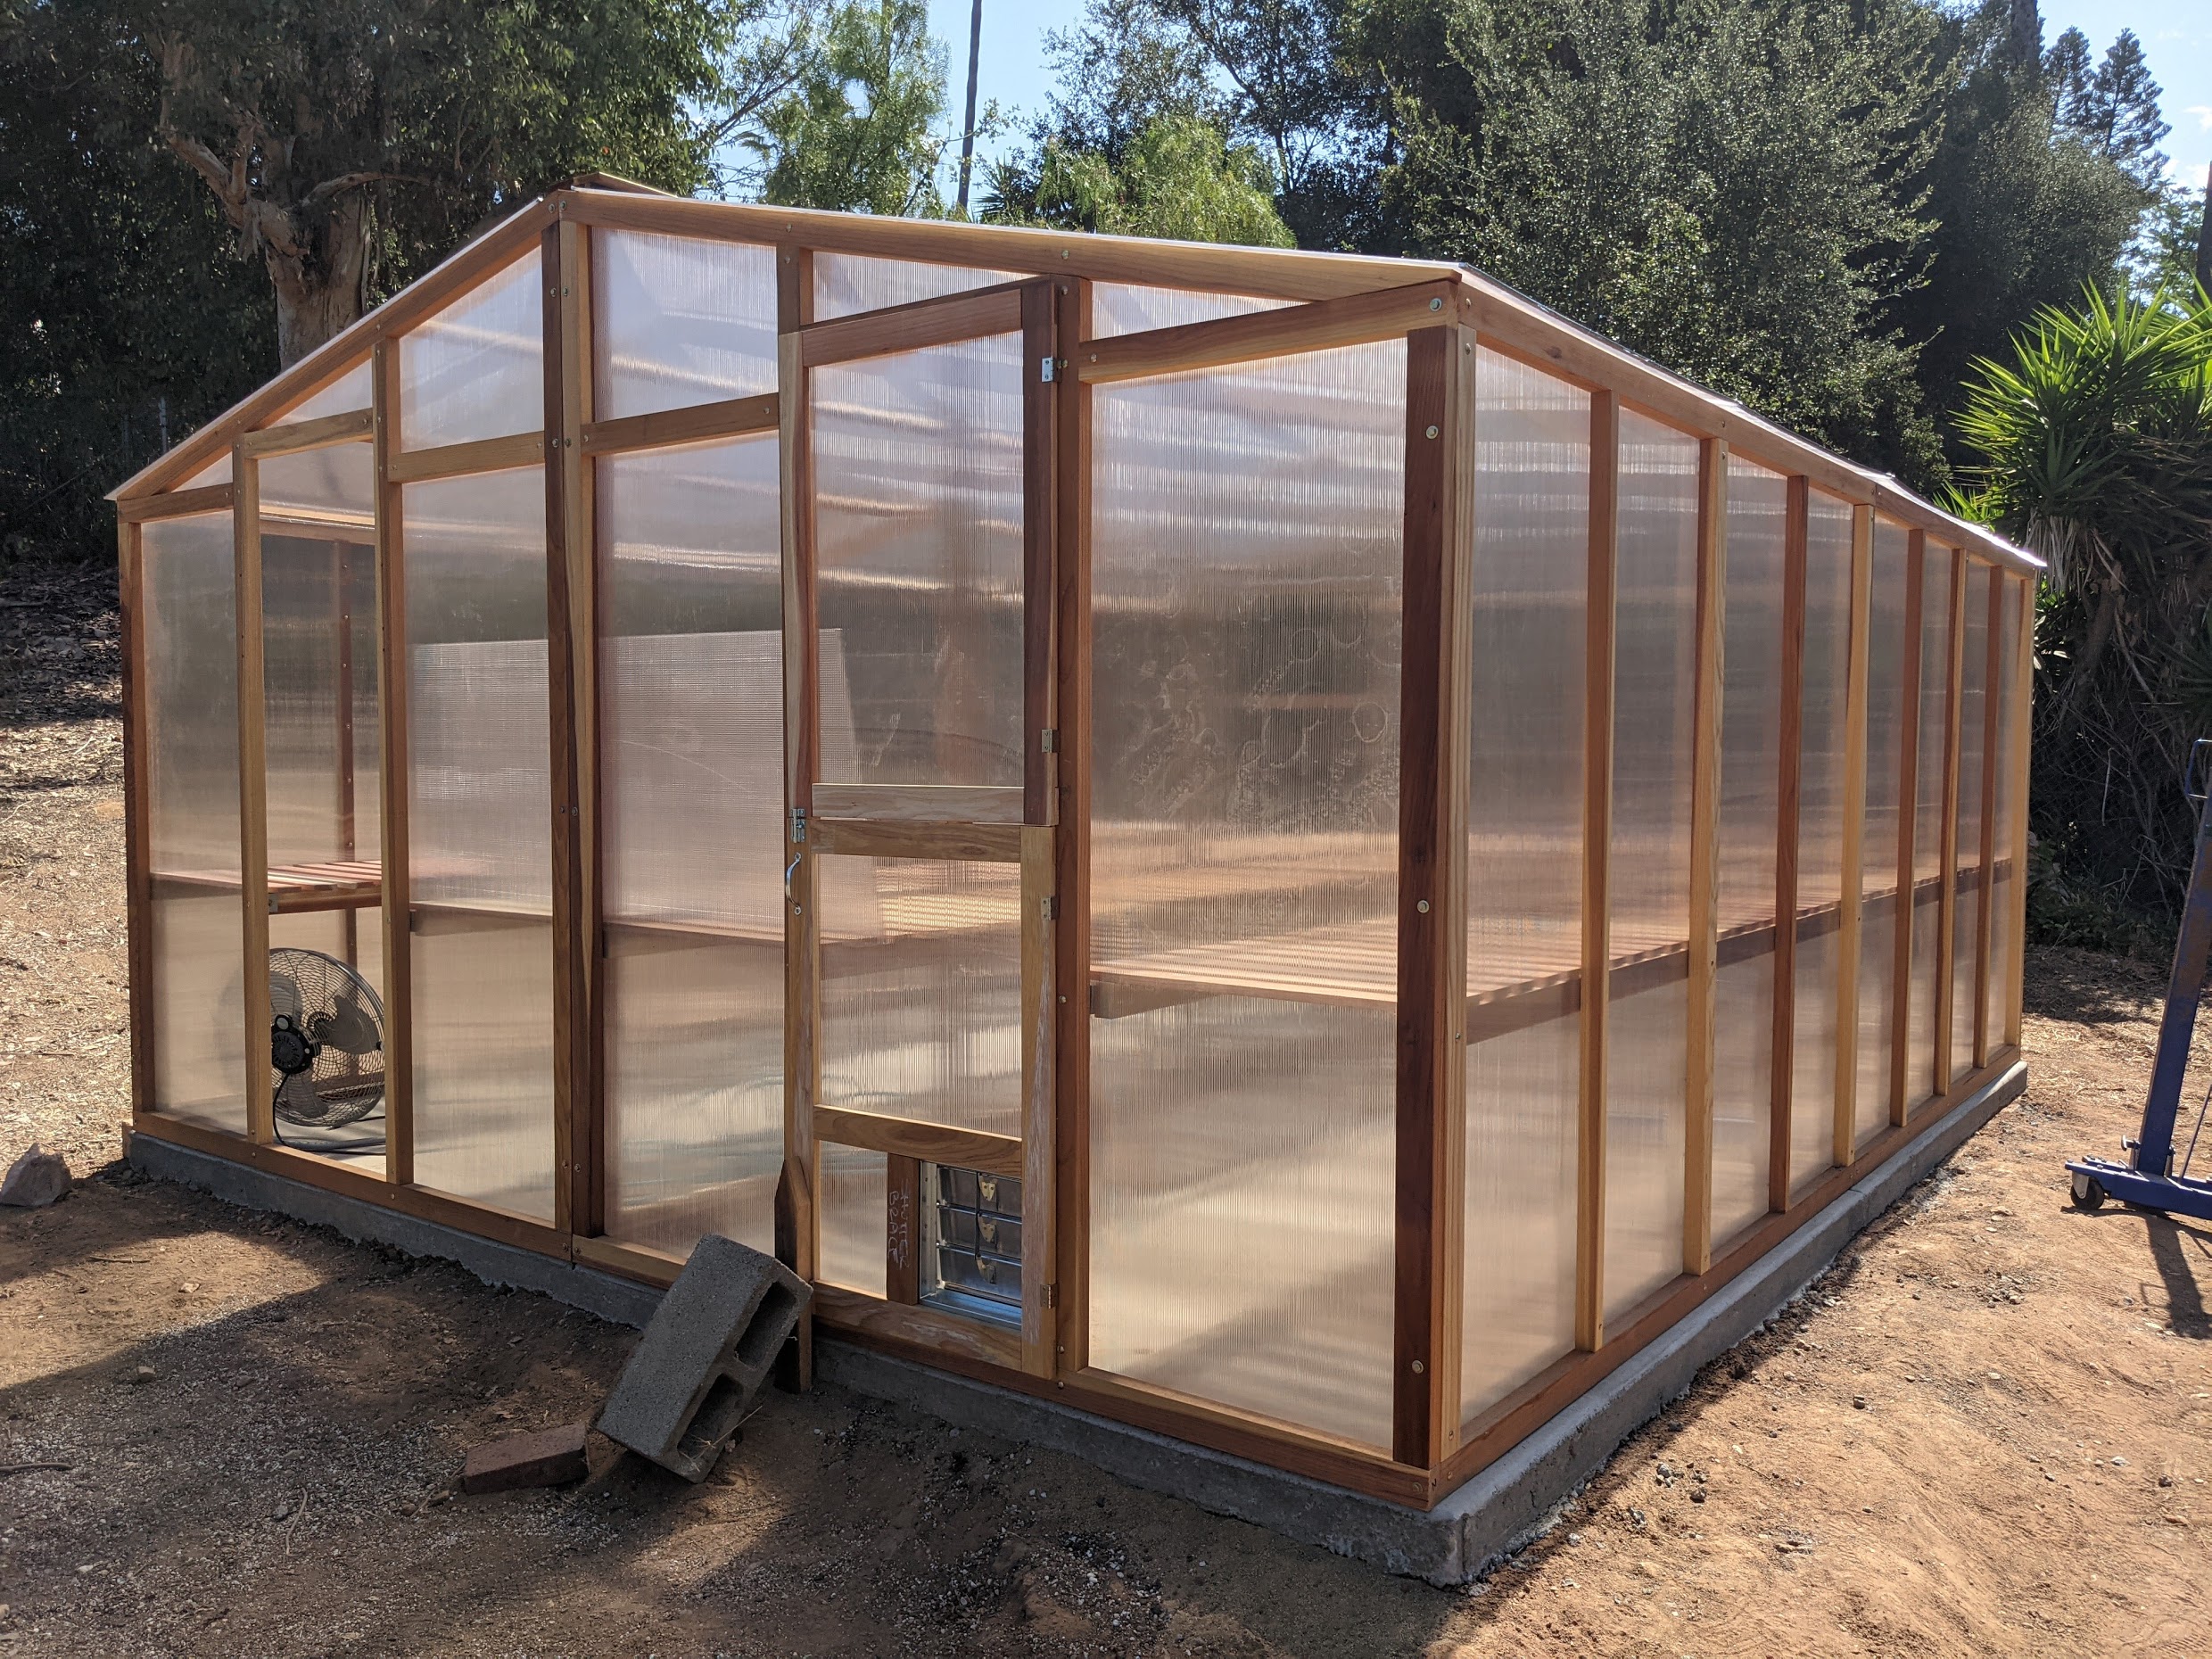 completed greenhouse